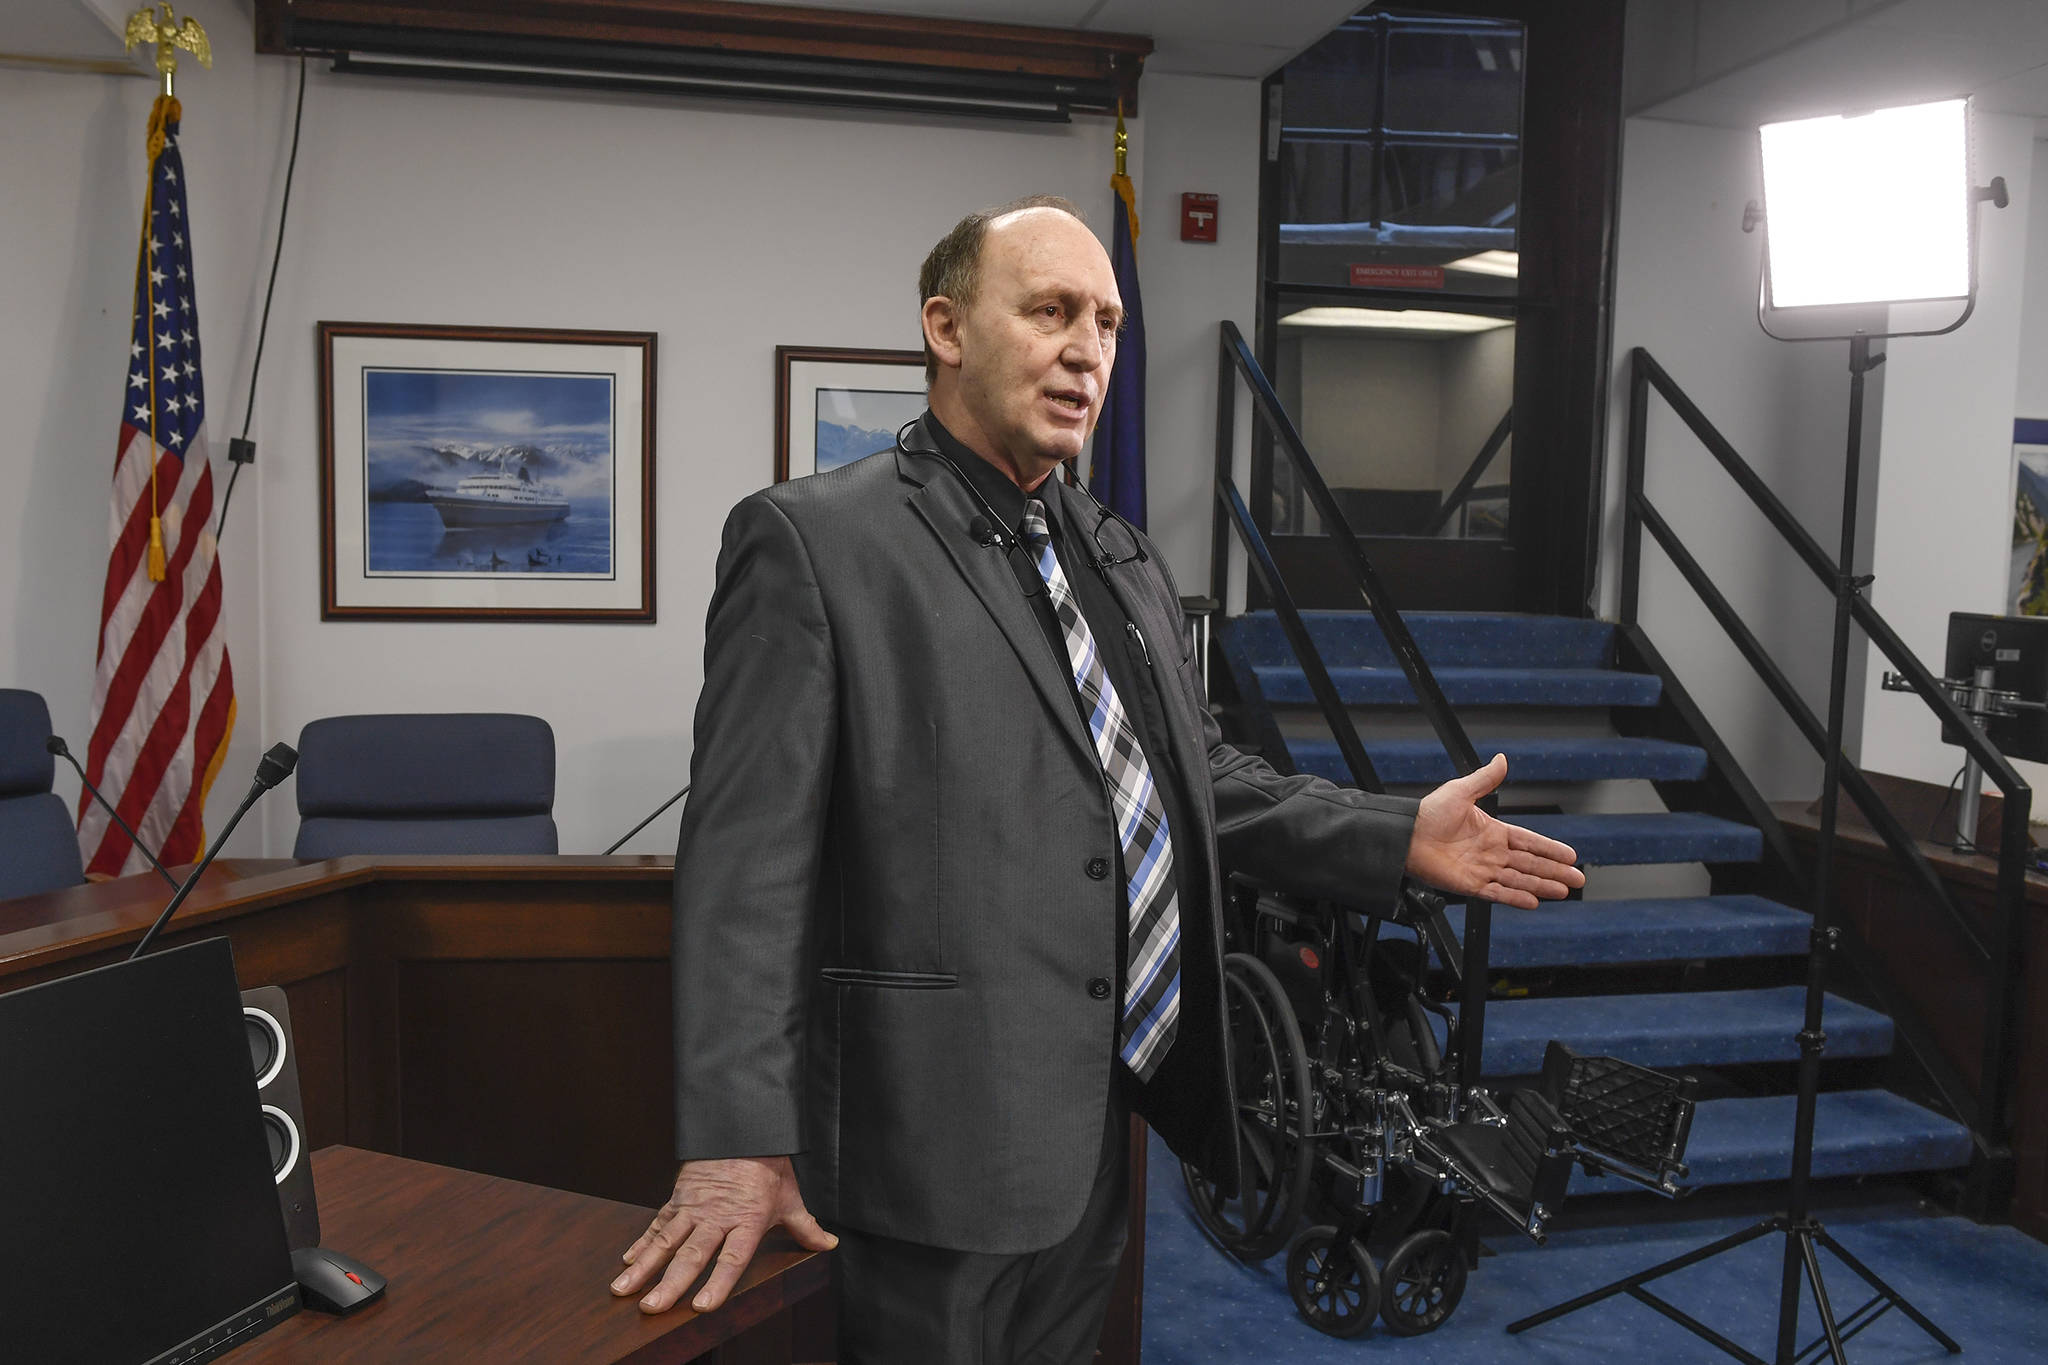 Rep. Gary Knopp, R-Kenai, talks to the media about his nomination for Speaker of the House in this February 2019 photo. Knopp died July, 31, in a plane crash near his home town. (Michael Penn/ Juneau Empire File)